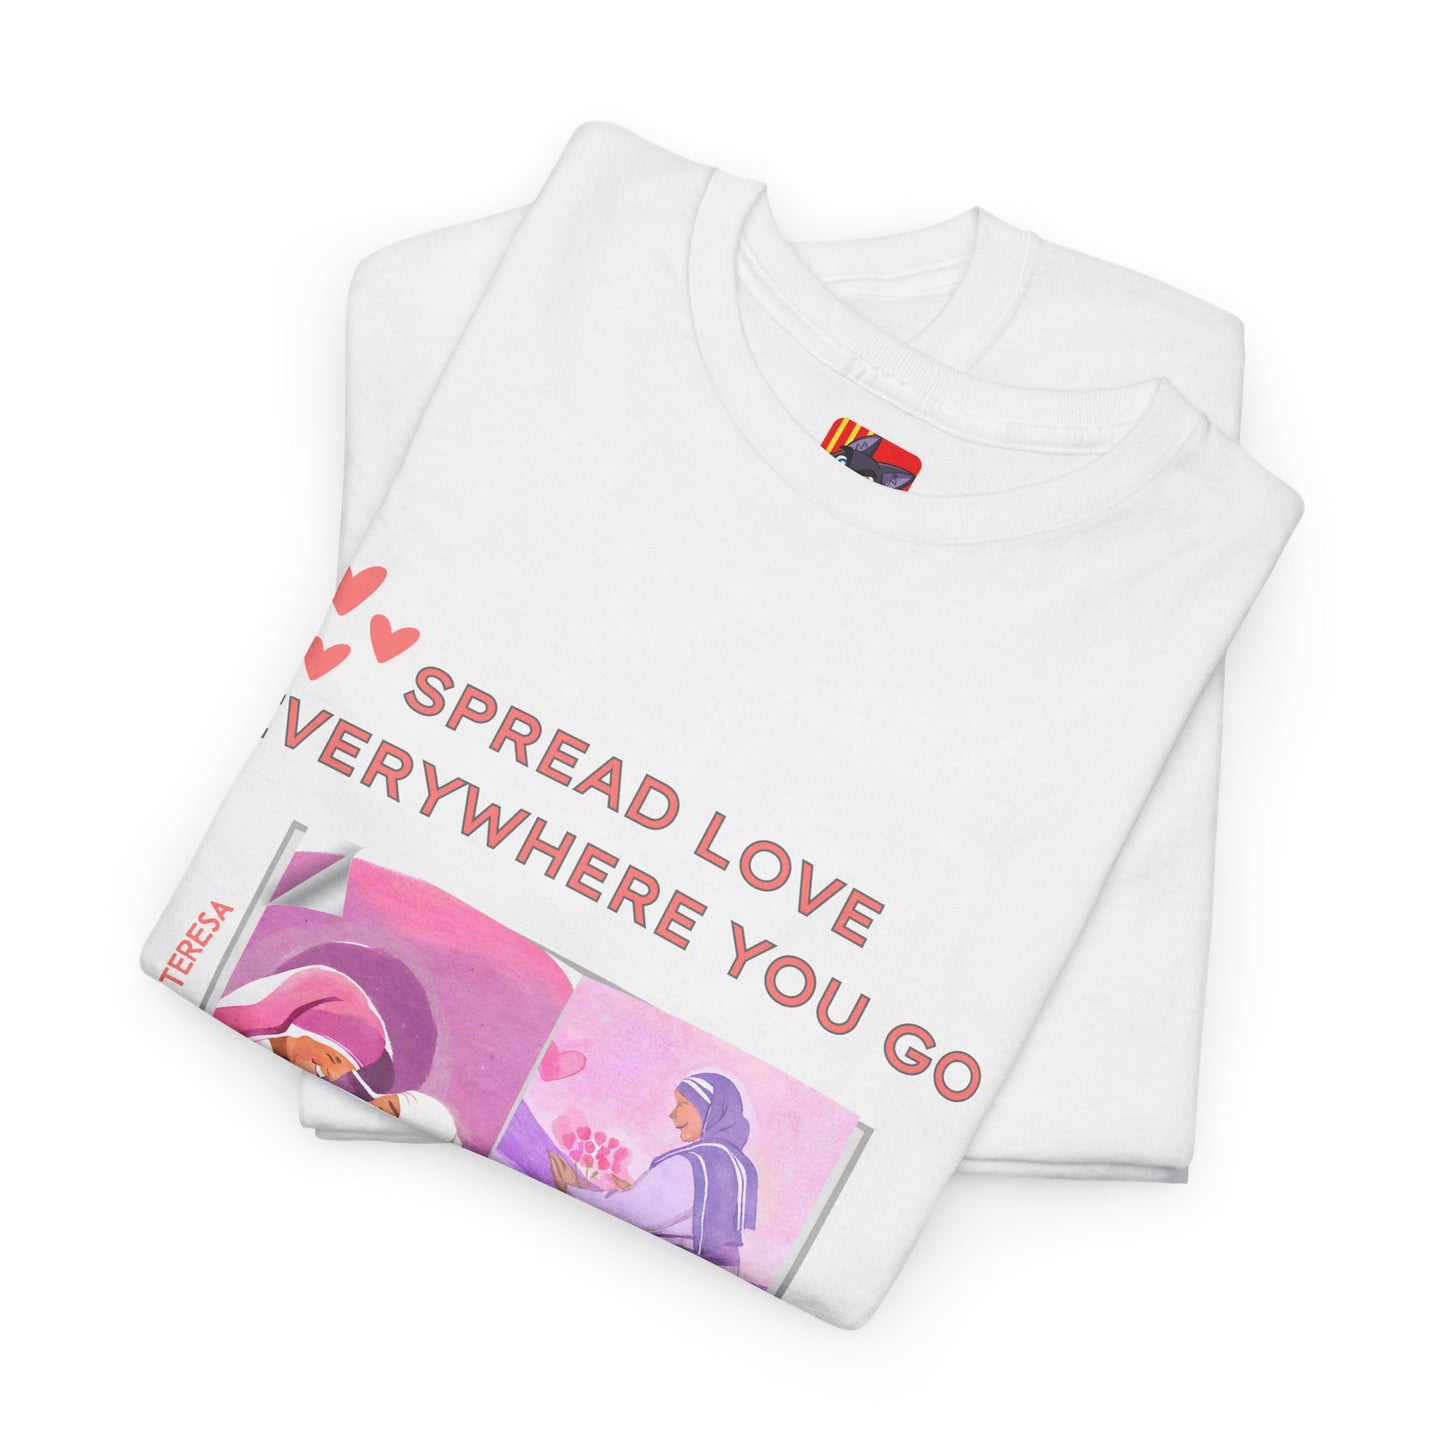 The Love Spreader T-Shirt: Make the World Brighter"Spread love everywhere you go" Mother Teresa